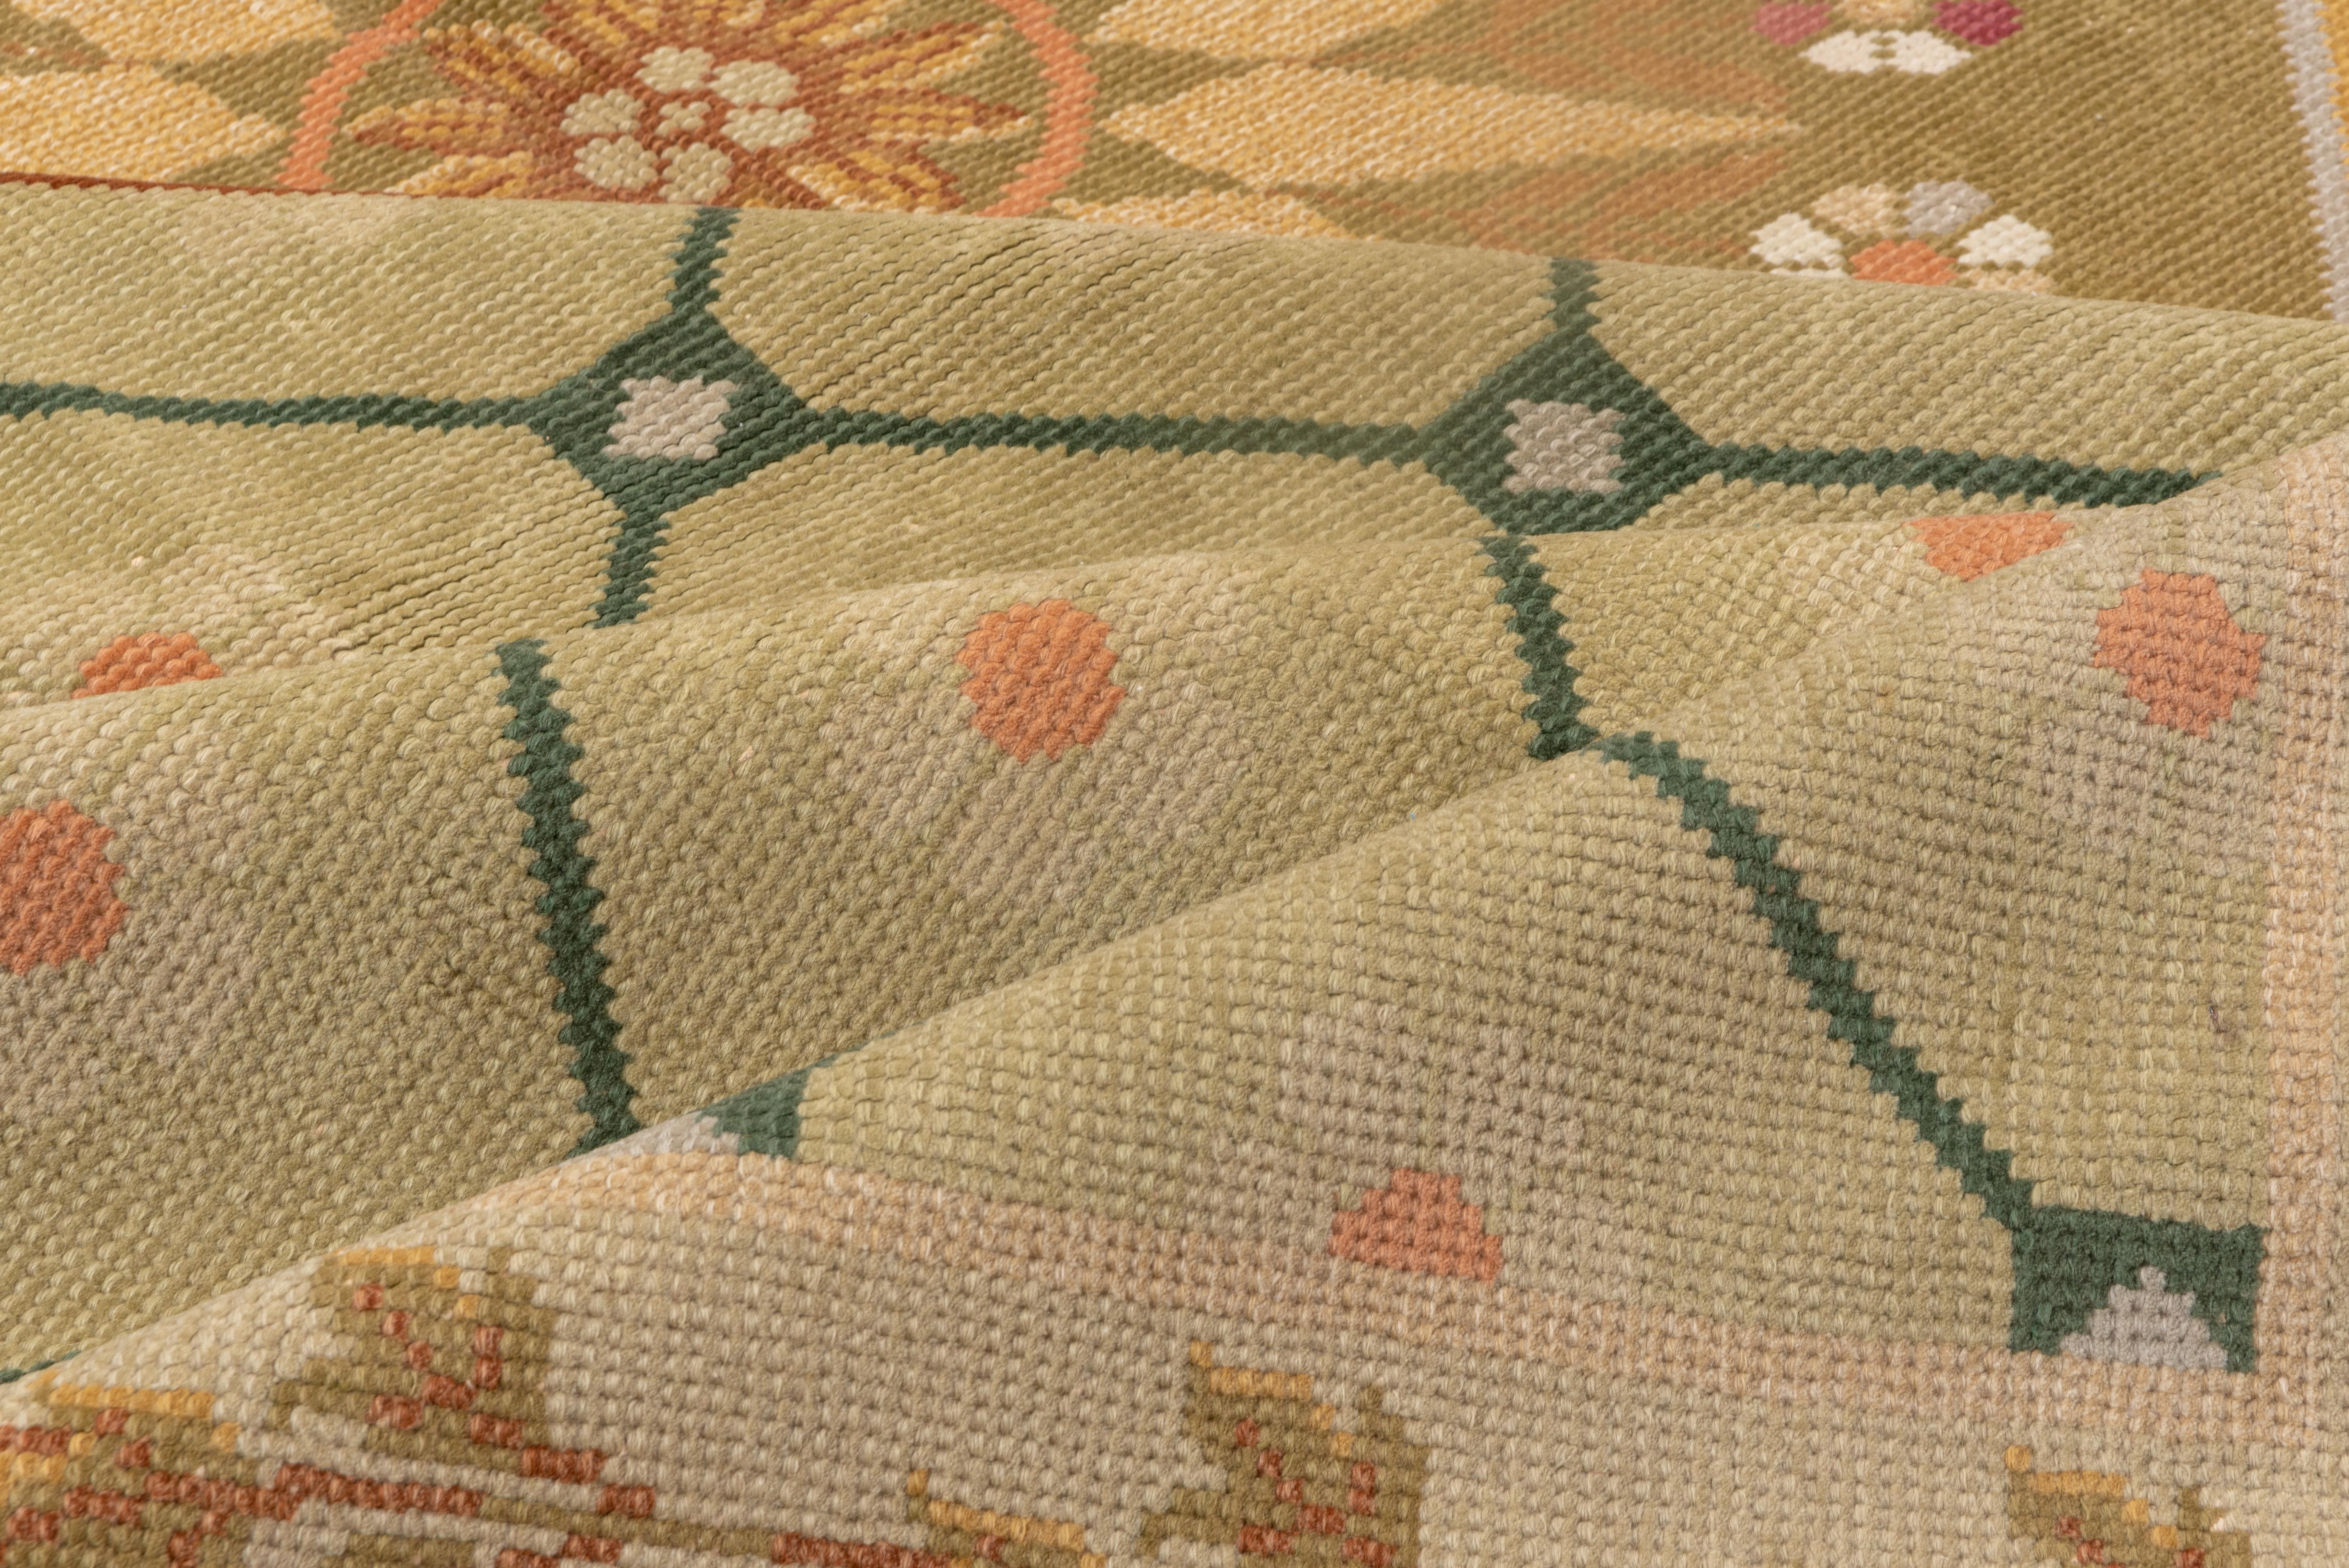 In a late Deco/ Moderne style, the pale straw field supports a diamond lattice overlaid by a bold octagonal medallion in rust, with a conforming gold surround with laurel leaf decoration. Giant 16 point central star. Ecru border of green triple leaf